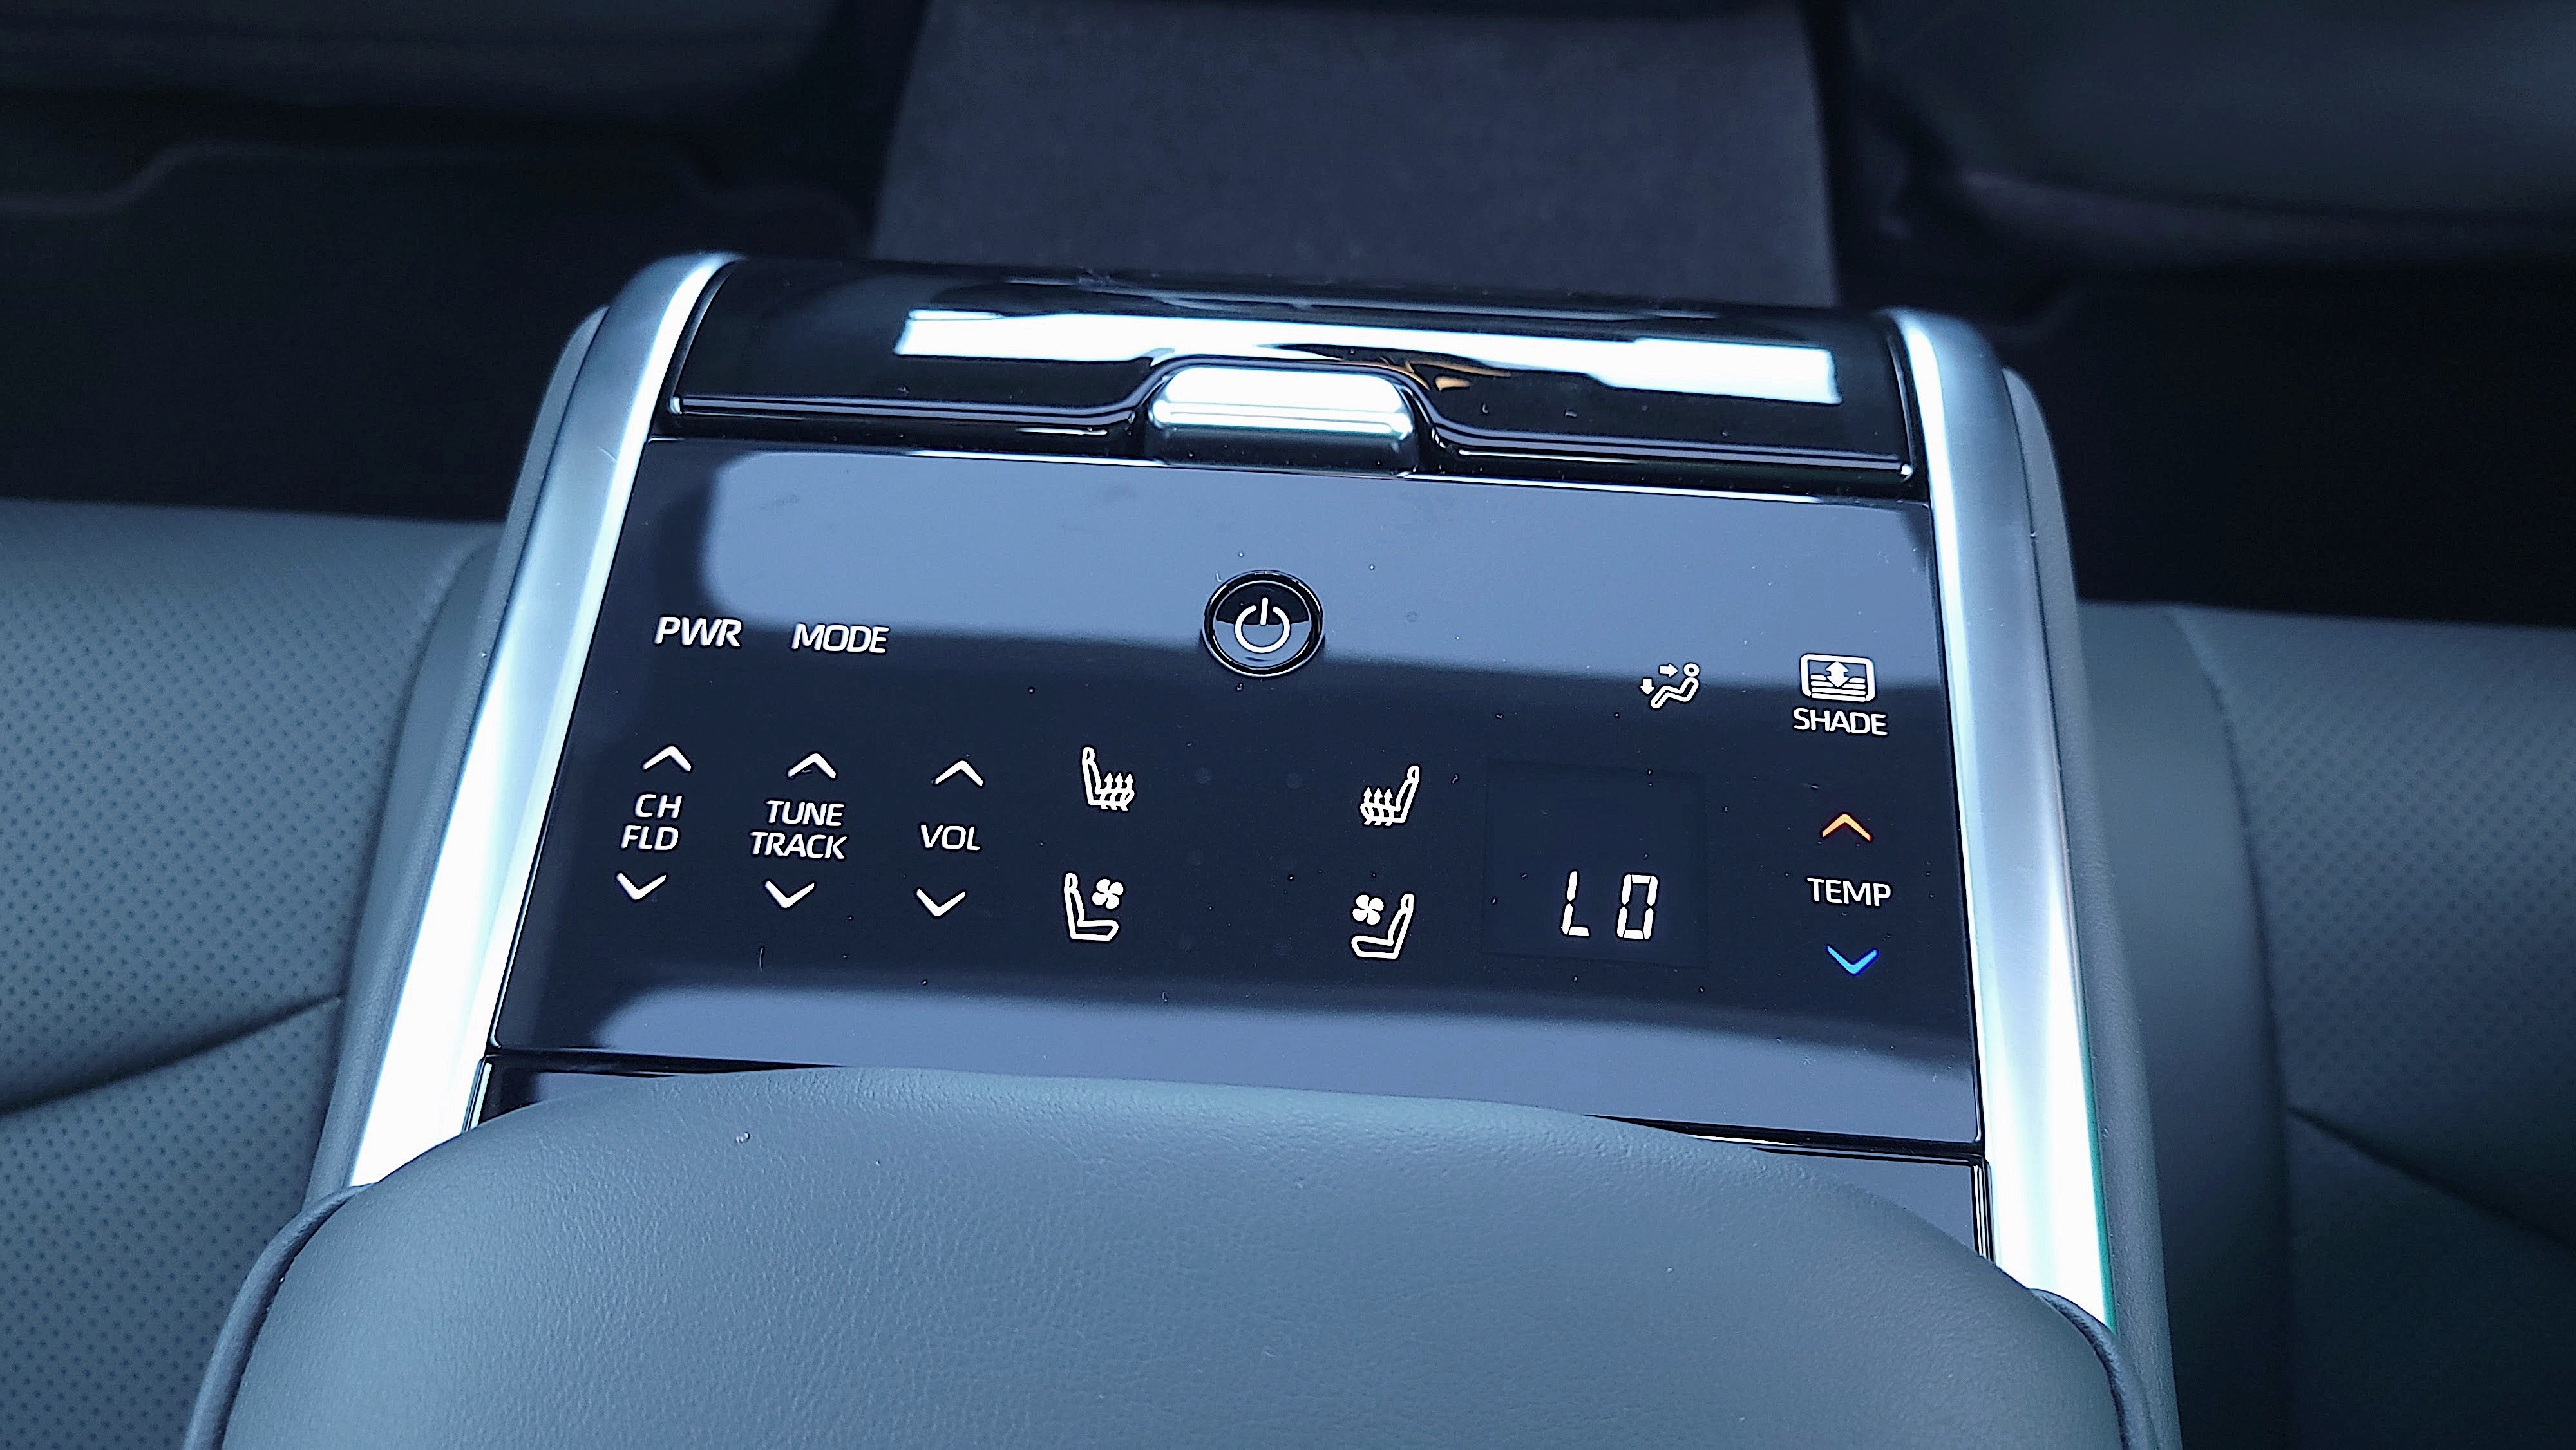 Climate control panel for rear passengers in the Toyota Mirai (2021)